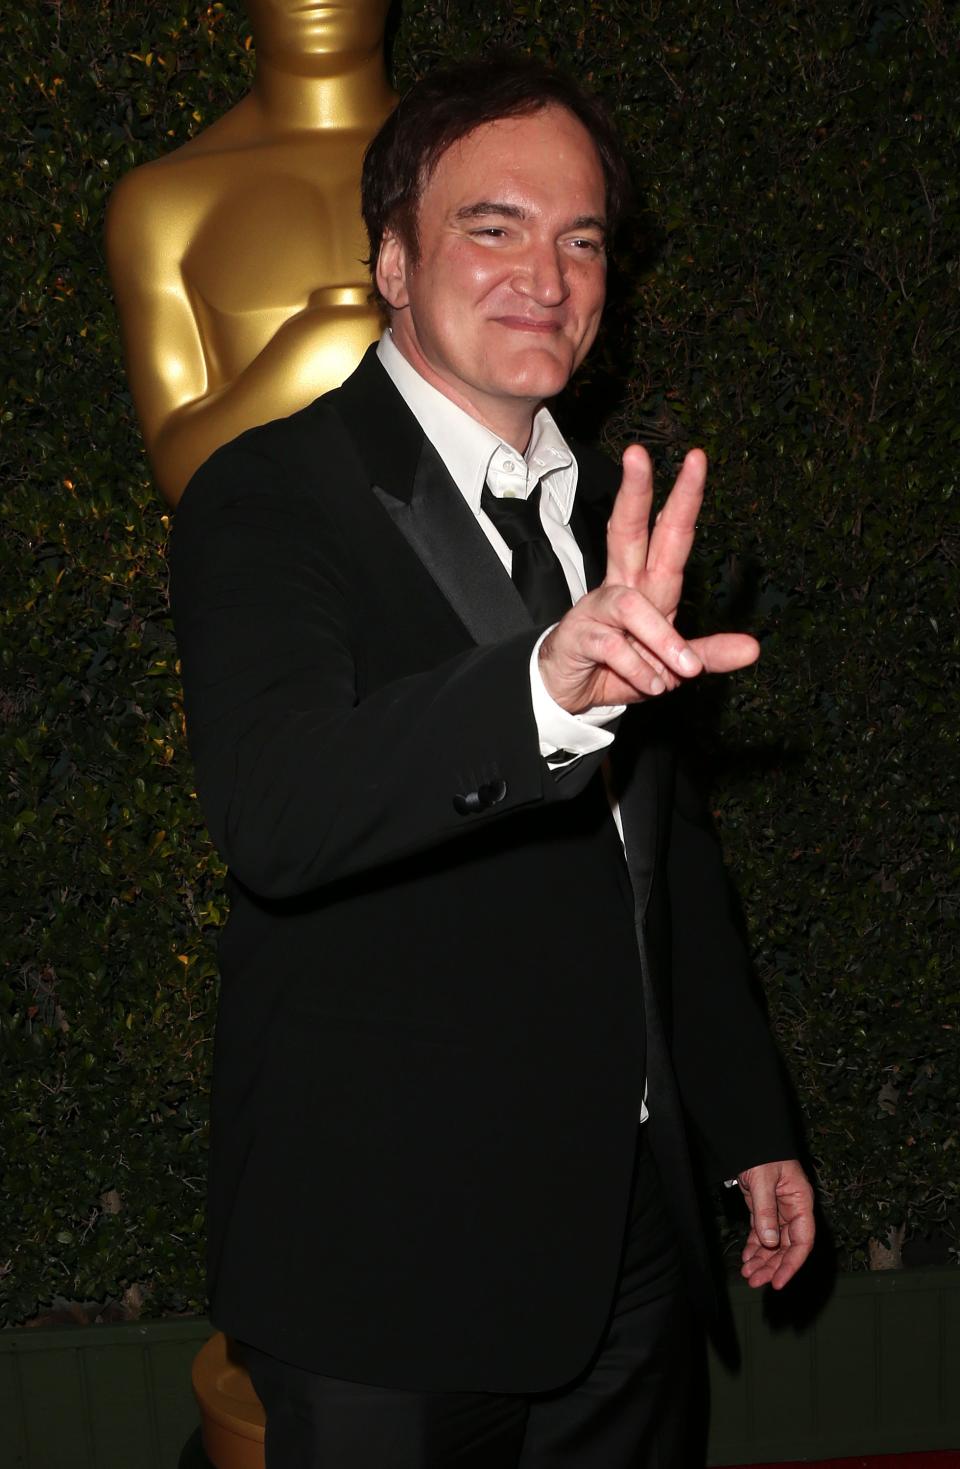 HOLLYWOOD, CA - DECEMBER 01: Director Quentin Tarantino attends the Academy Of Motion Picture Arts And Sciences' 4th Annual Governors Awards at Hollywood and Highland on December 1, 2012 in Hollywood, California. (Photo by Frederick M. Brown/Getty Images)